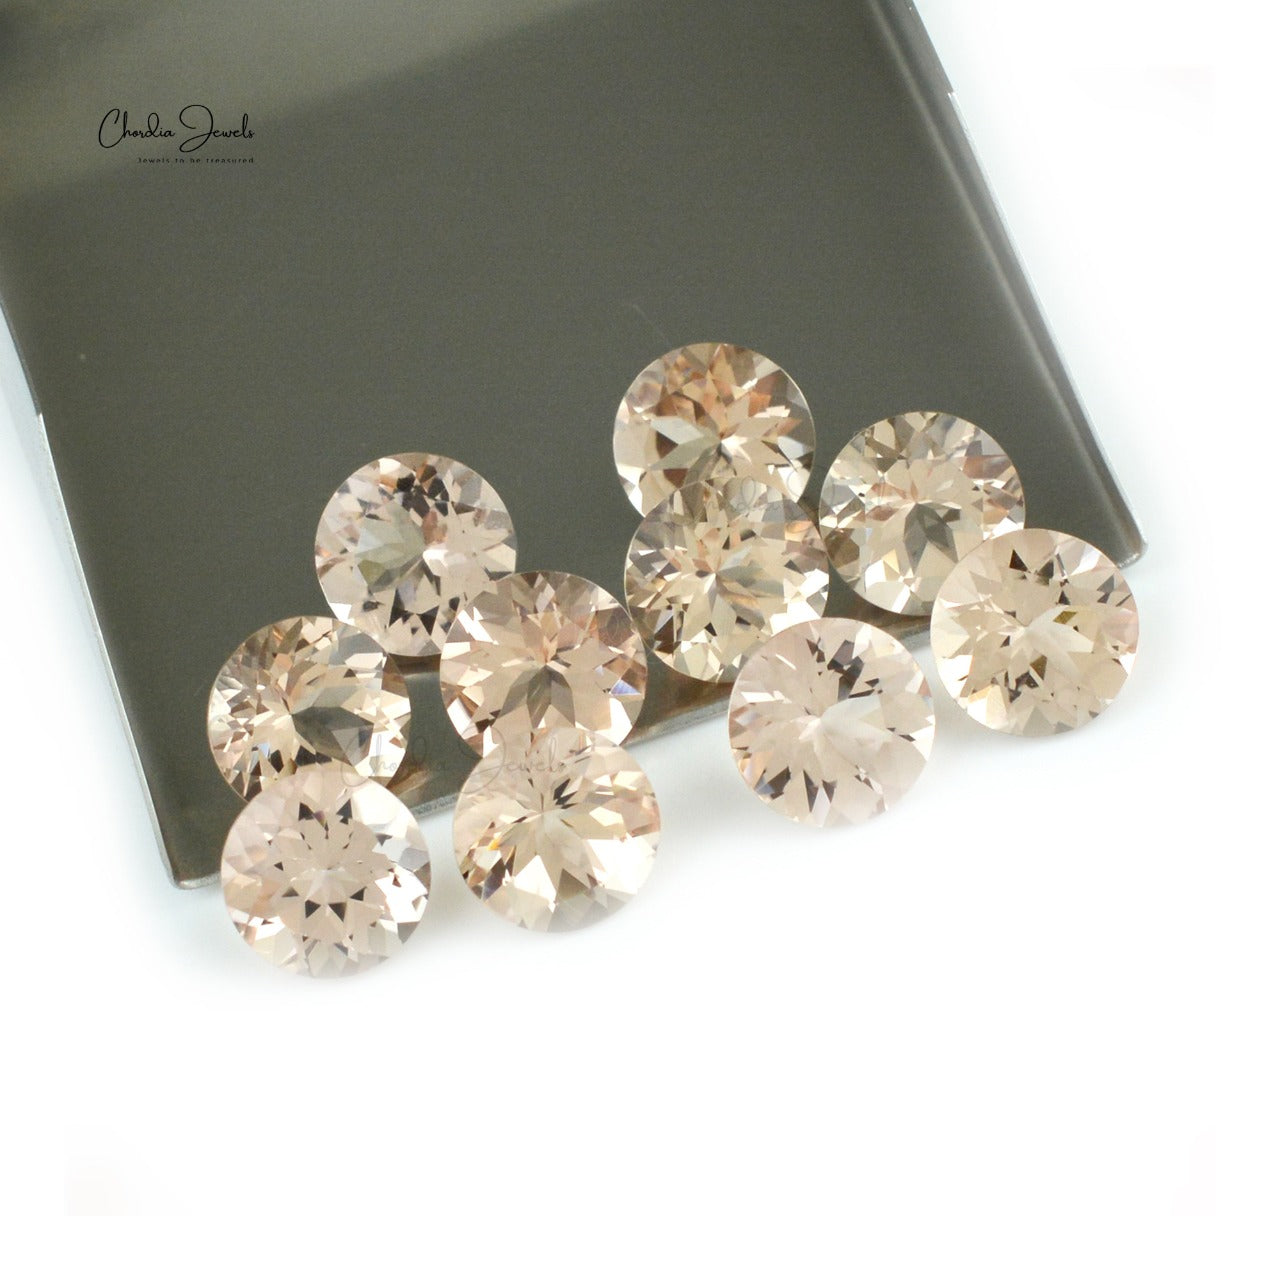 Natural Morganite Cushion Cut 9mm Faceted Loose Gemstone at Discount Price, 1 Piece